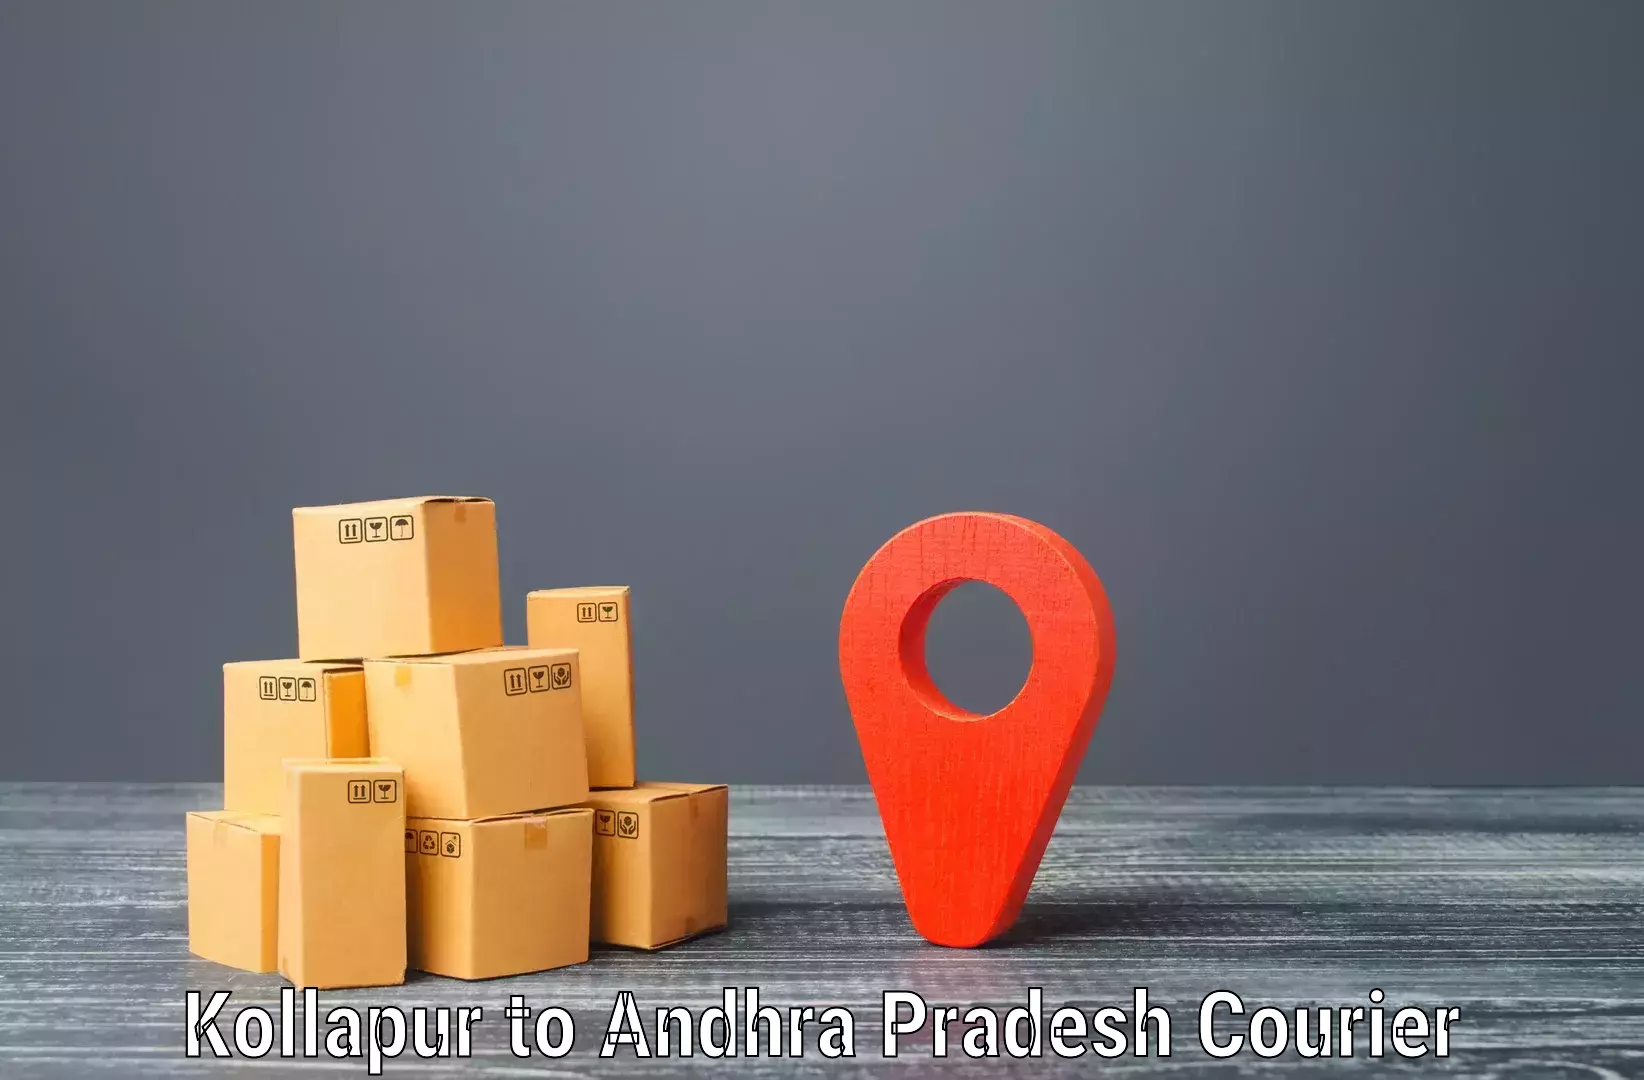 Round-the-clock parcel delivery Kollapur to Cuddapah